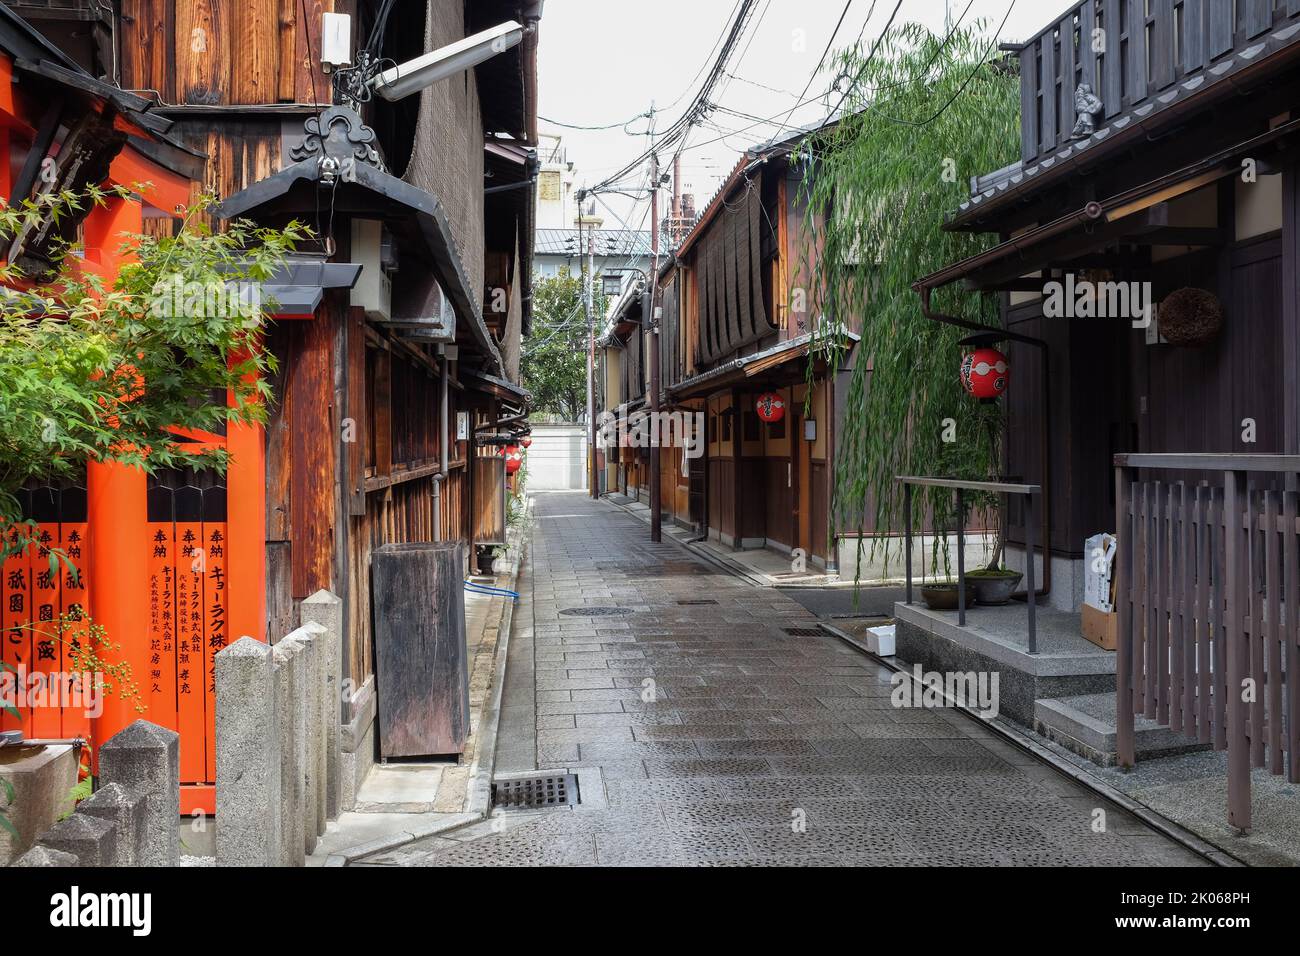 A street in the historic district of Gion, Kyoto City, Japan. Stock Photo